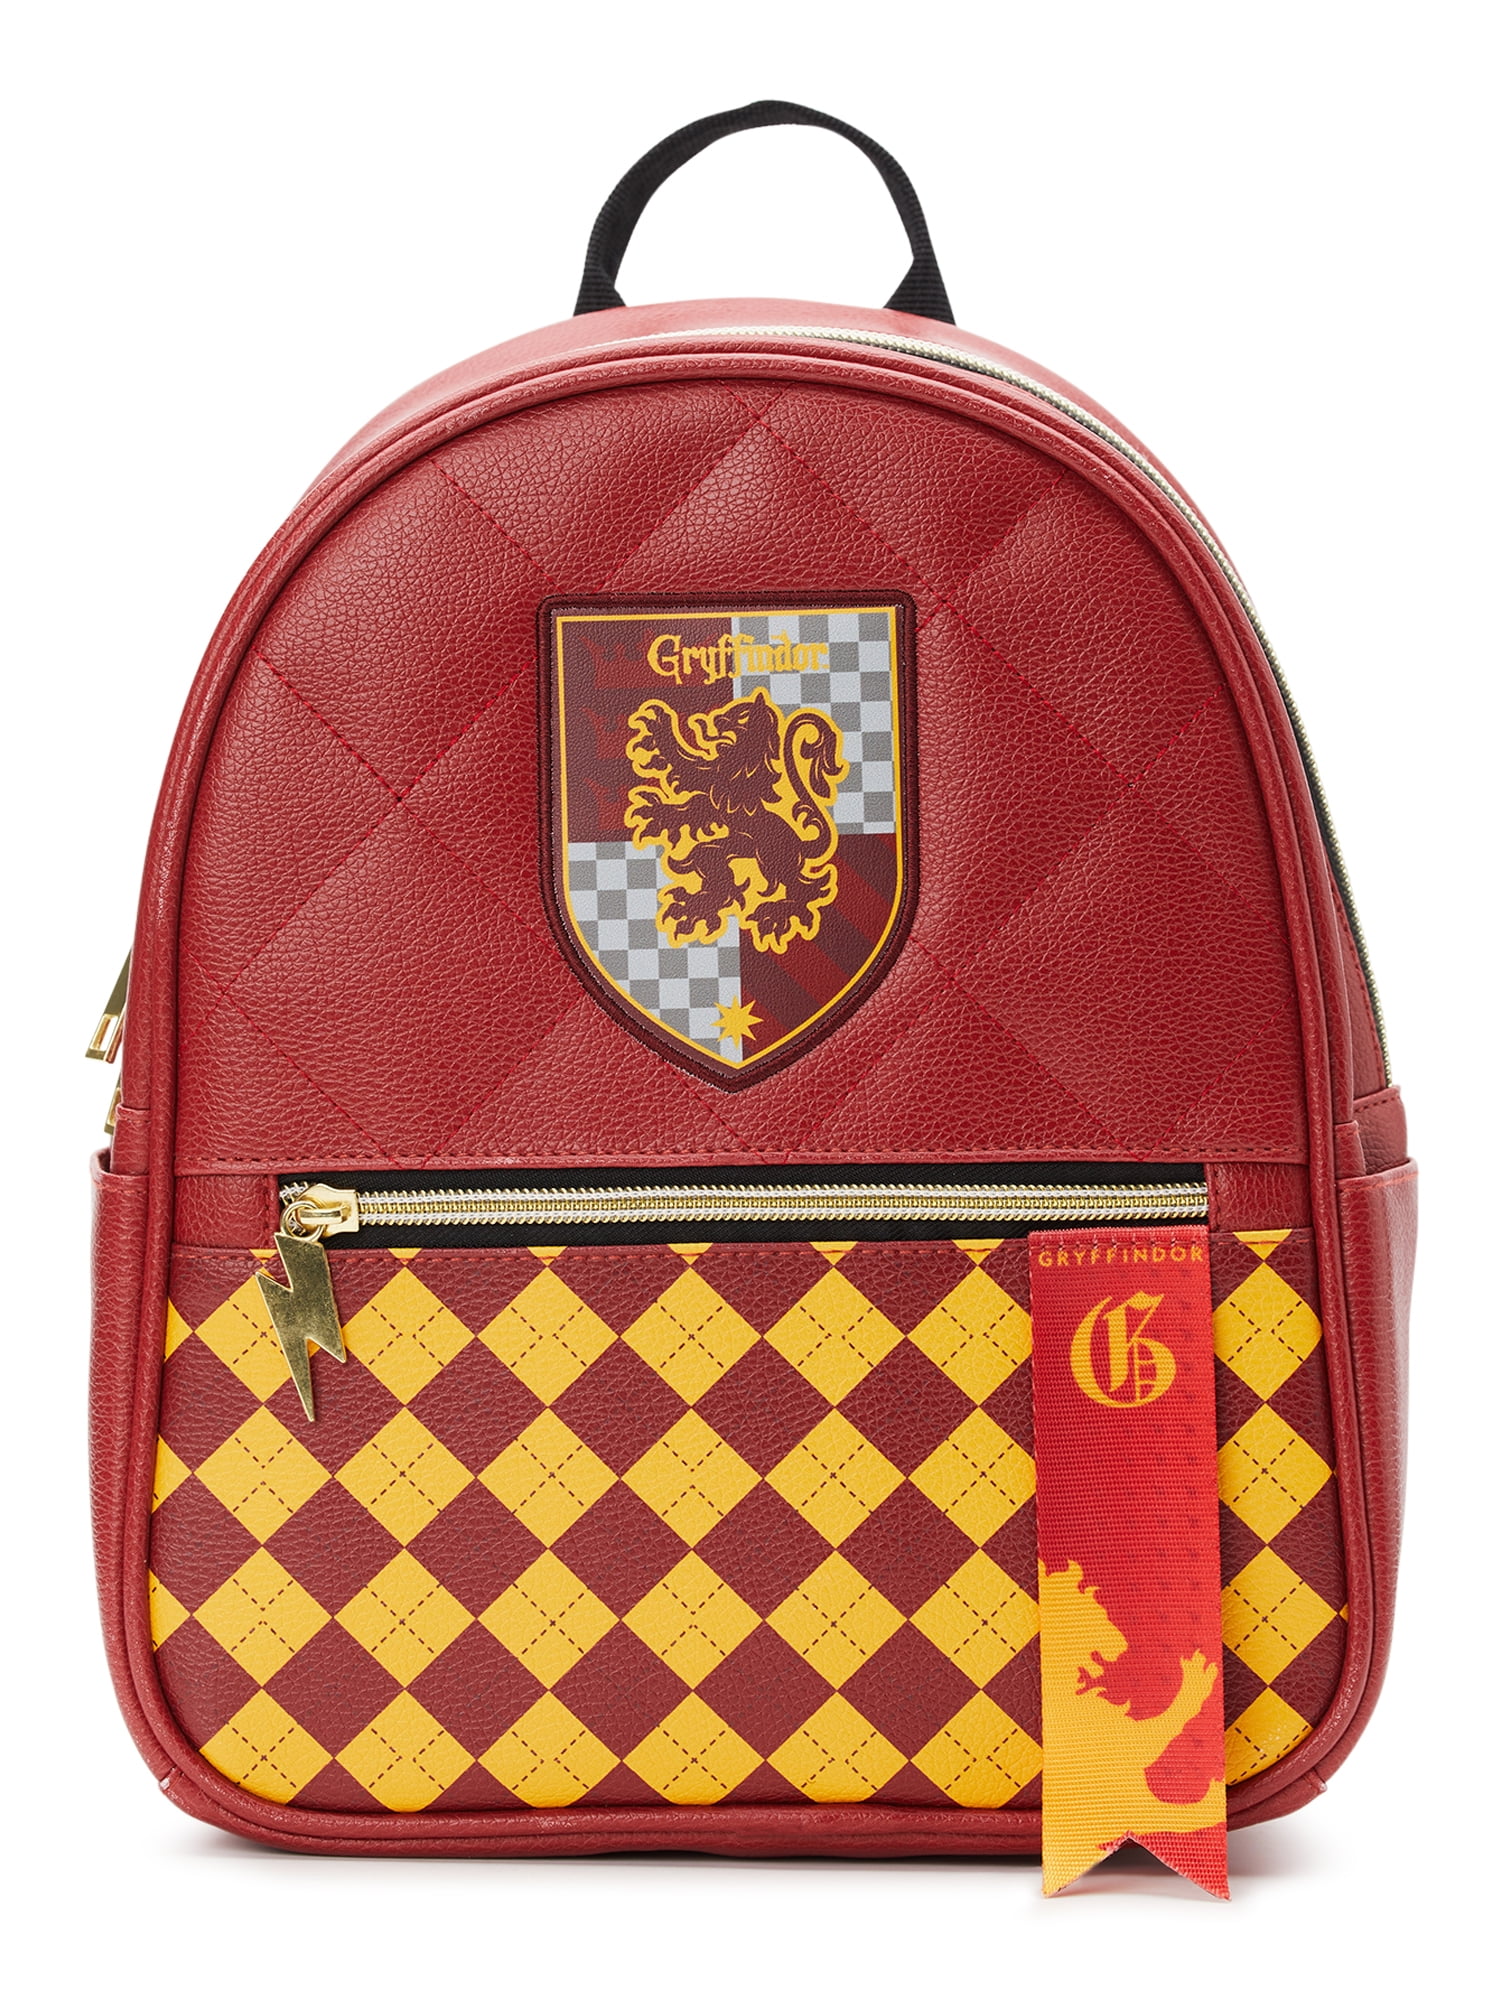 HARRY POTTER HOGWARTS CASTLE LOUNGEFLY MINI BACKPACK – Margarita's Toy Chest